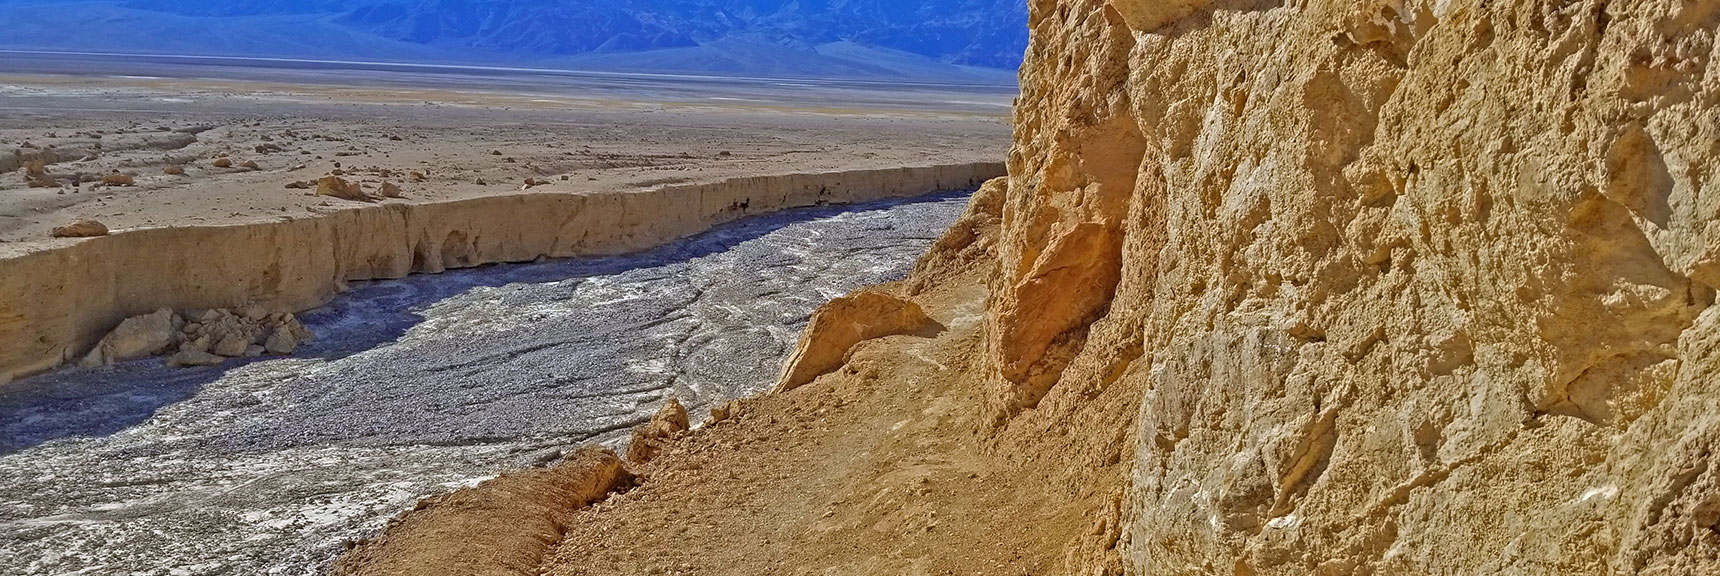 One-Mile Return Trail to Golden Canyon Skirts the Eastern Cliffs of Death Valley. | Golden Canyon to Zabriskie Point | Death Valley National Park, California